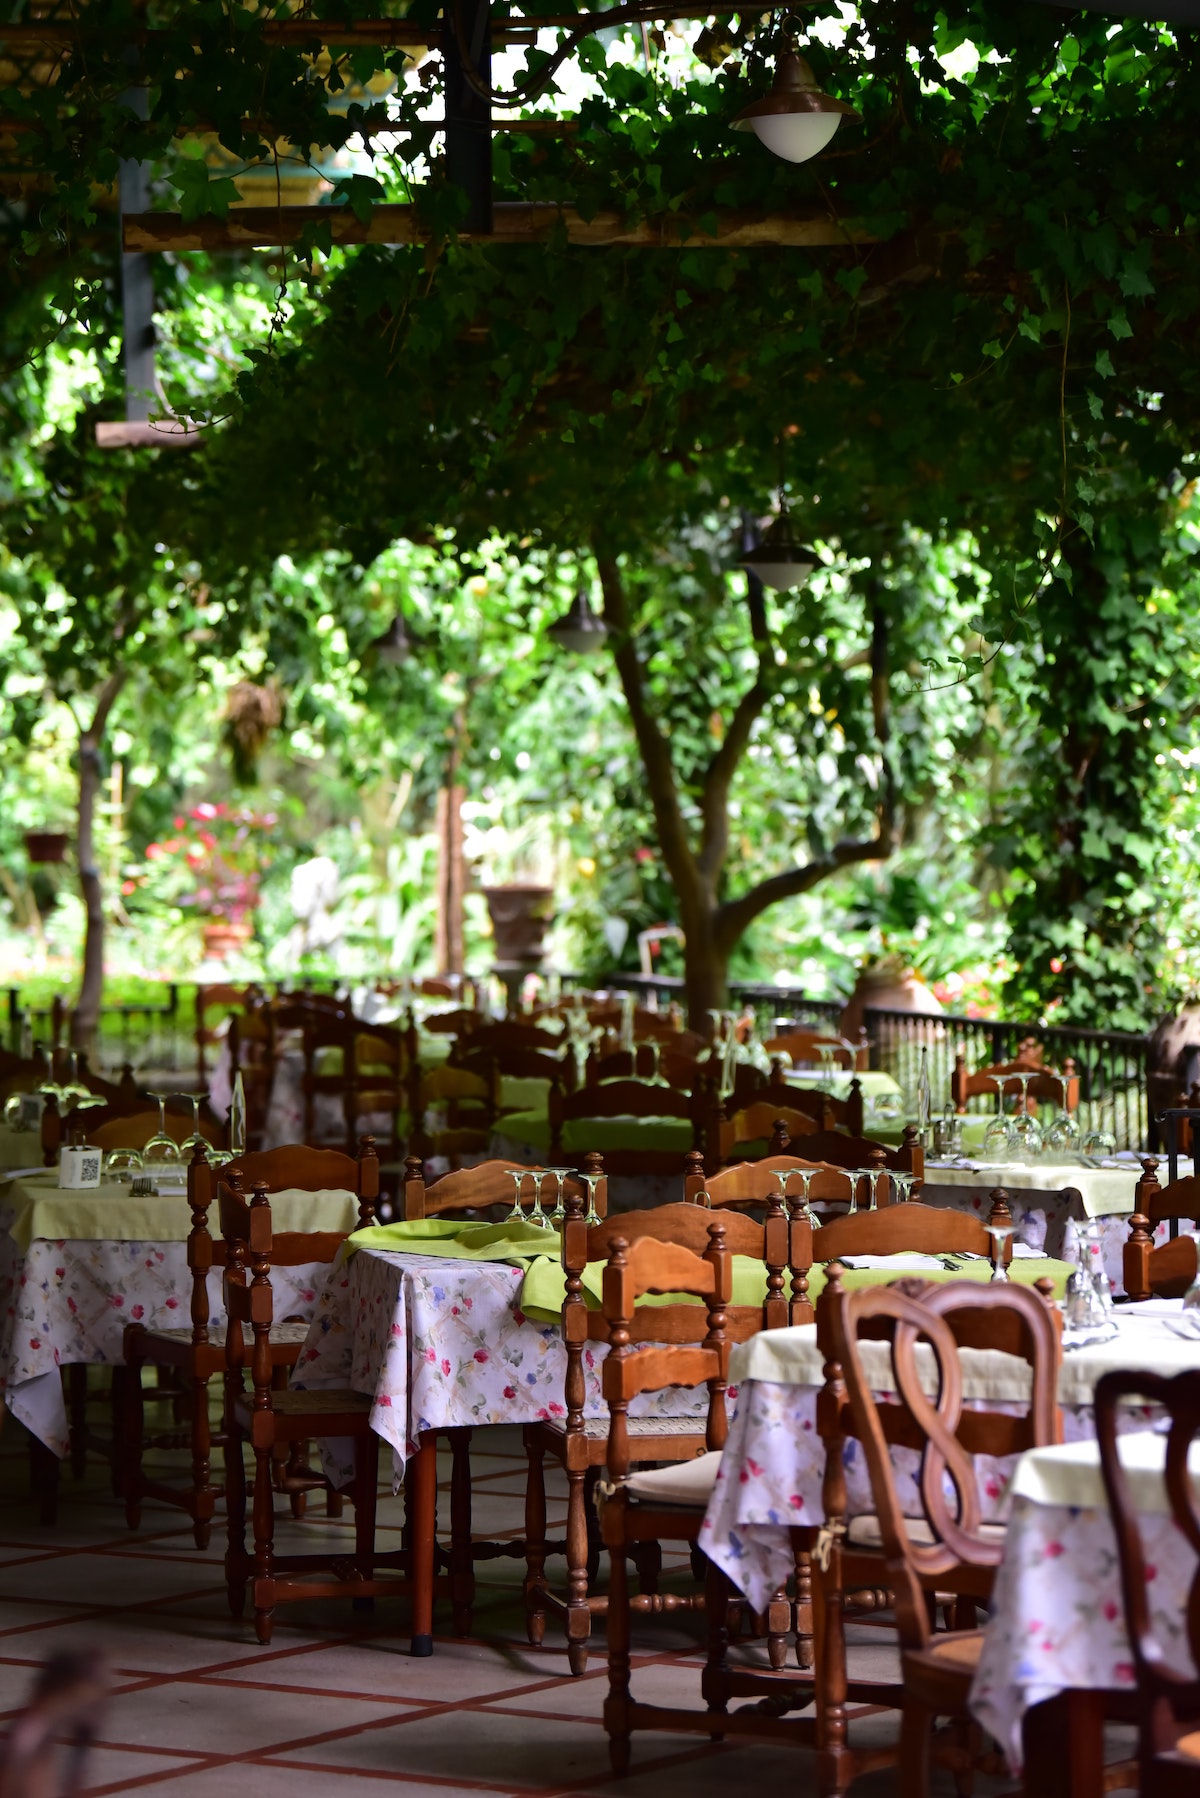 An outdoor seating area at a restaurant in Naples with a canopy of greenery